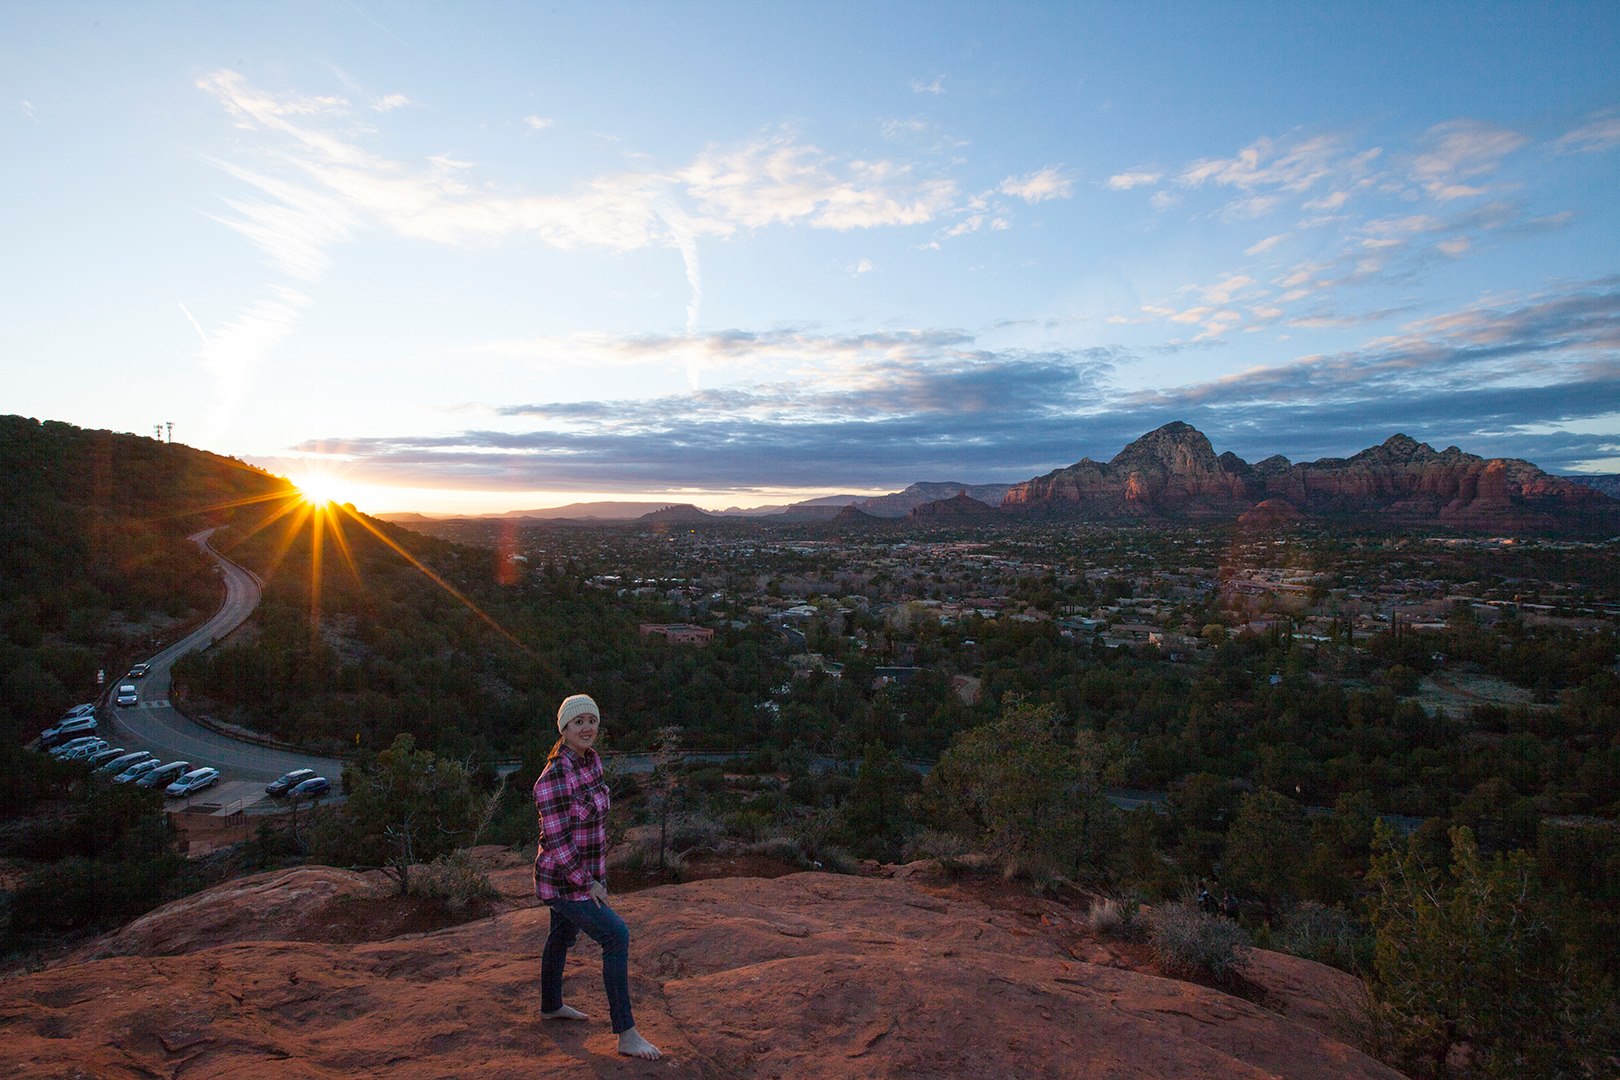 Sunsets in Sedona at Airport Vortex